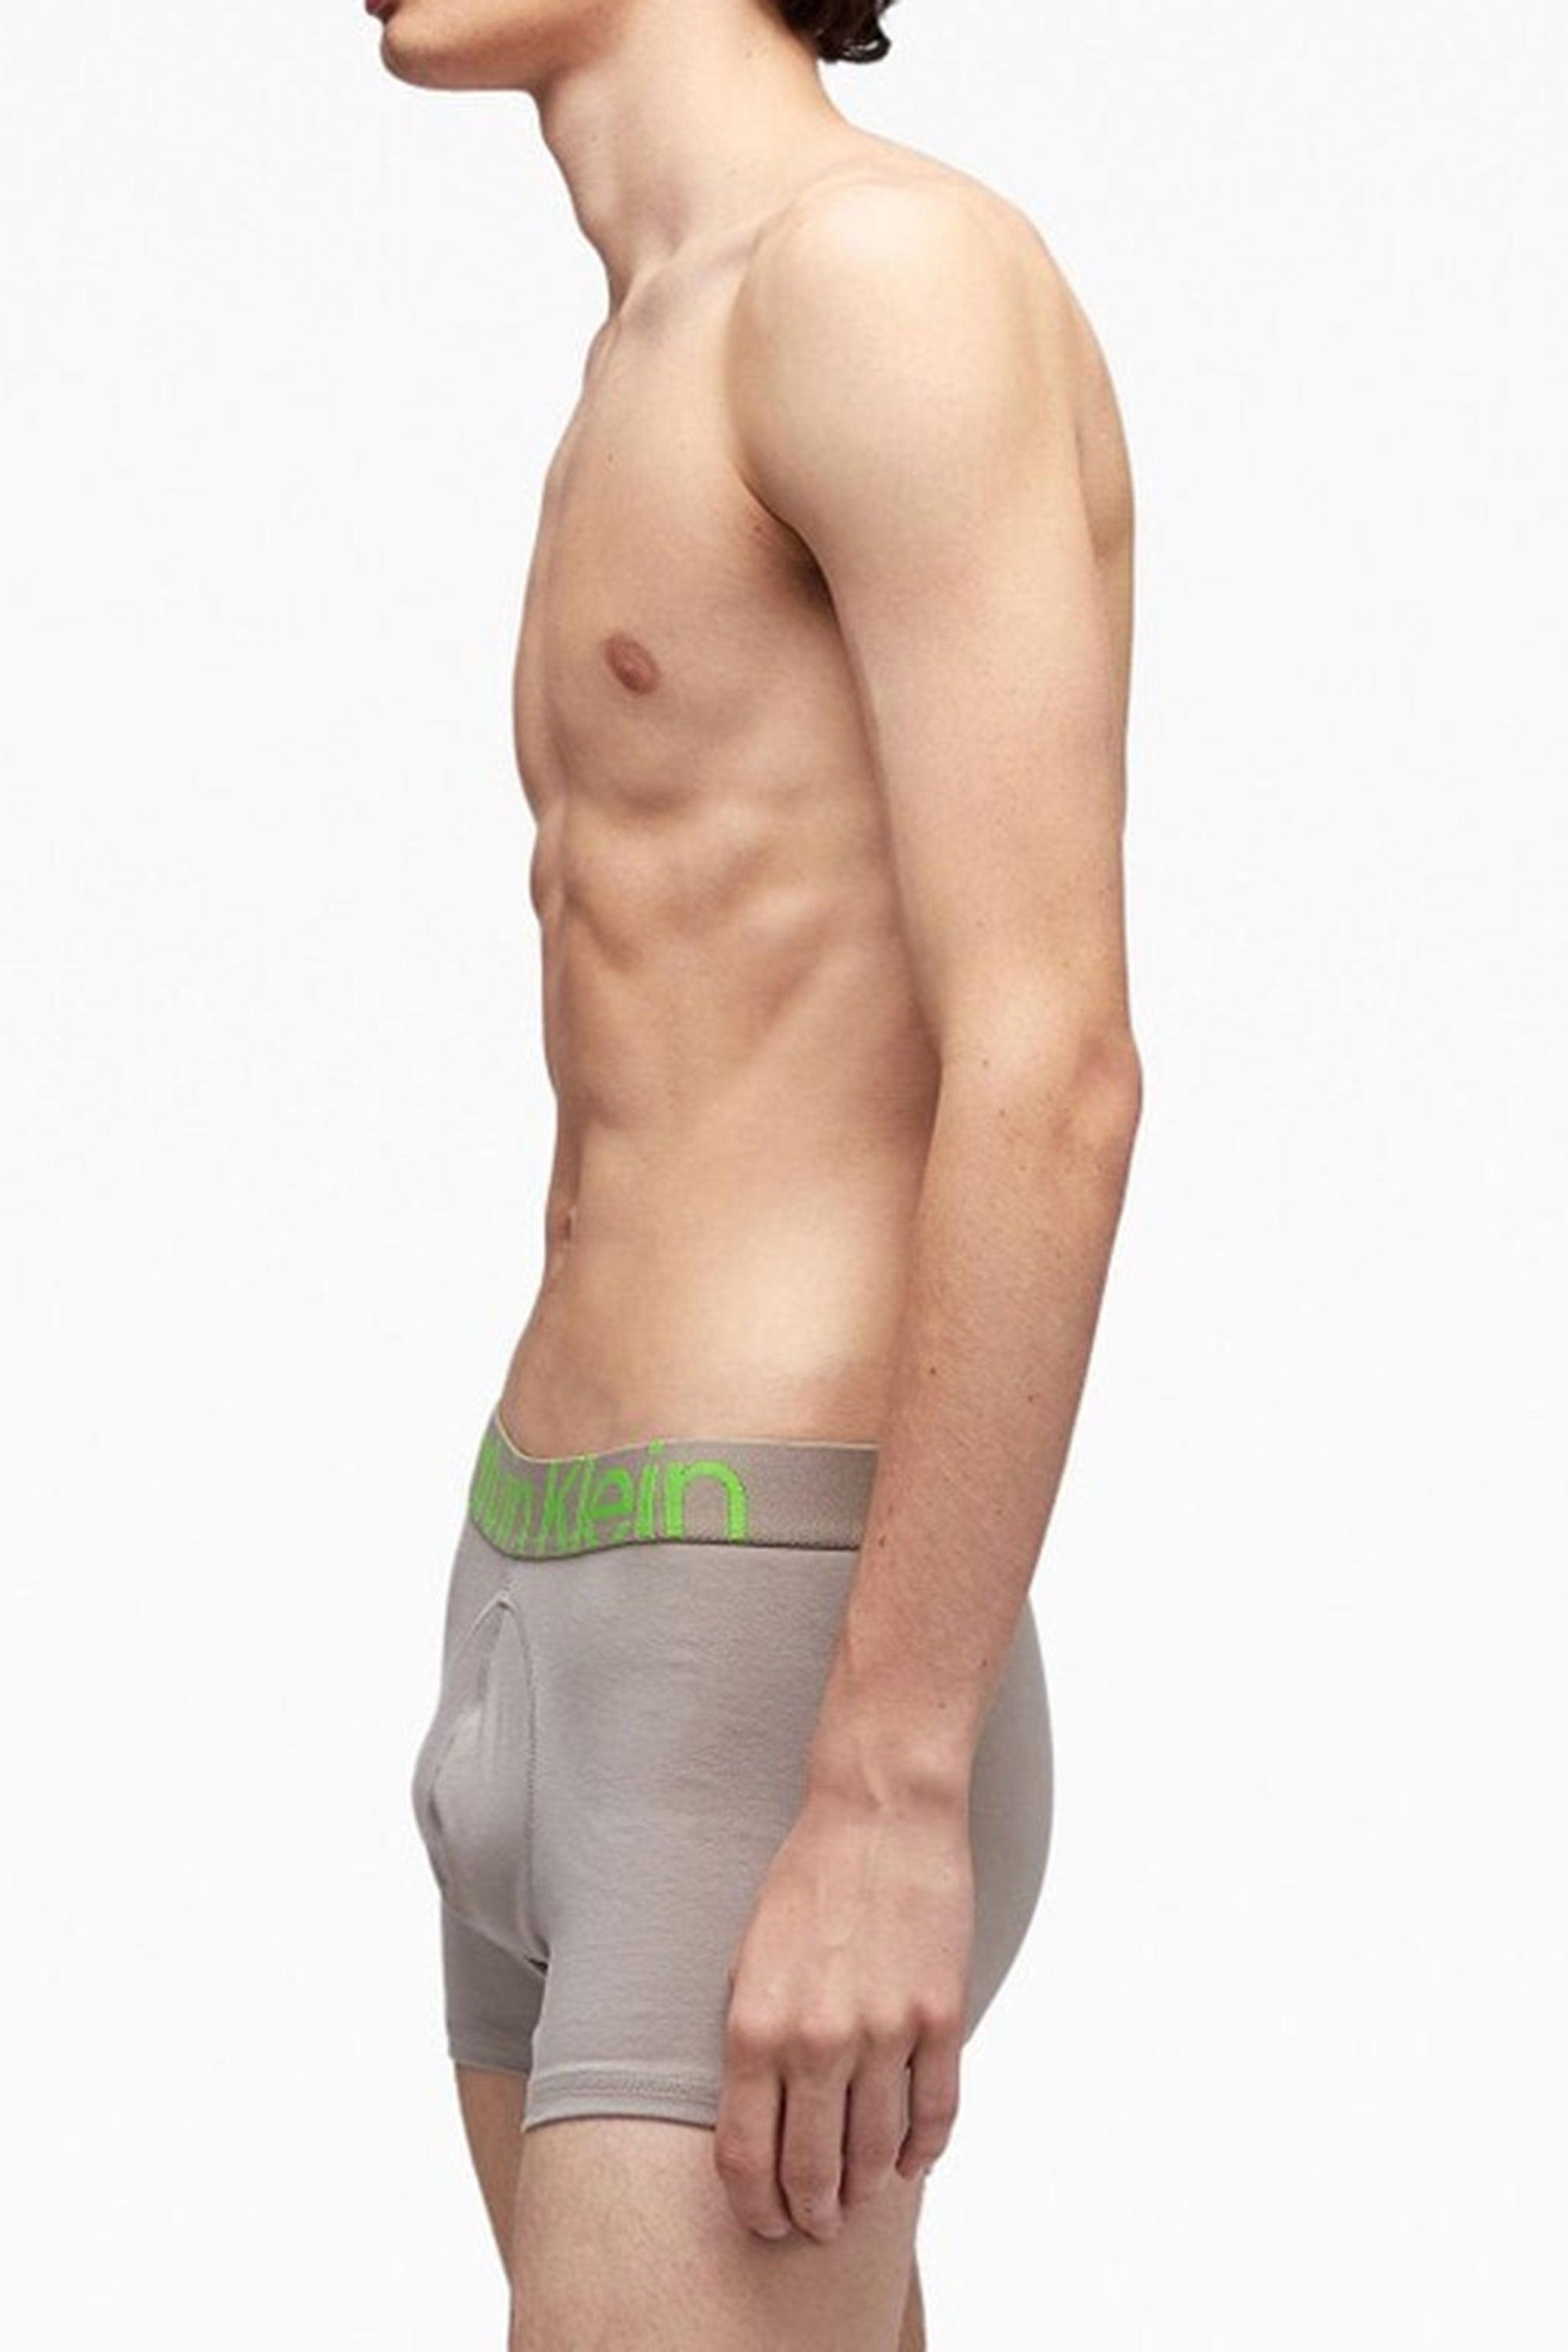 Calvin Klein 1996 V-Day Micro Low Rise Trunk